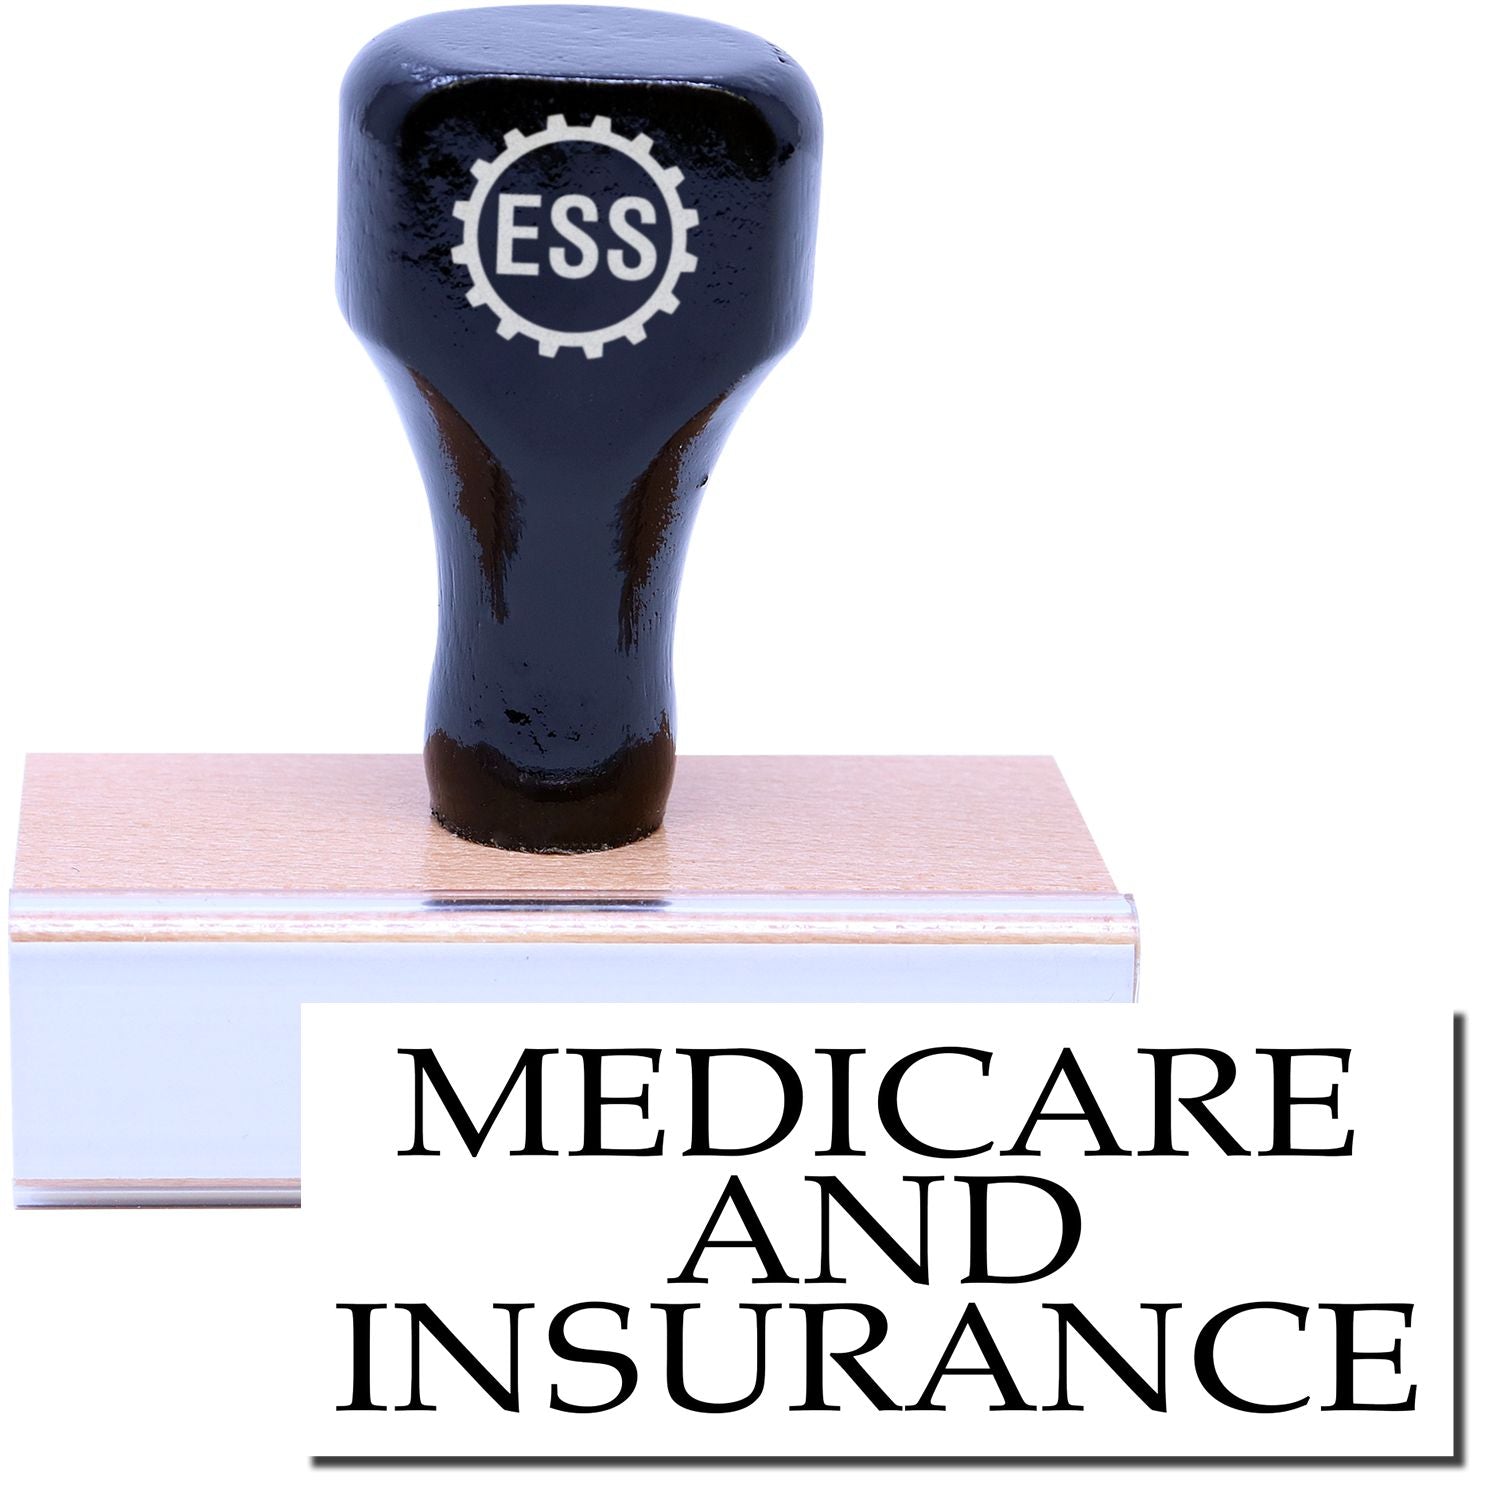 A stock office rubber stamp with a stamped image showing how the text "MEDICARE AND INSURANCE" in a large font is displayed after stamping.